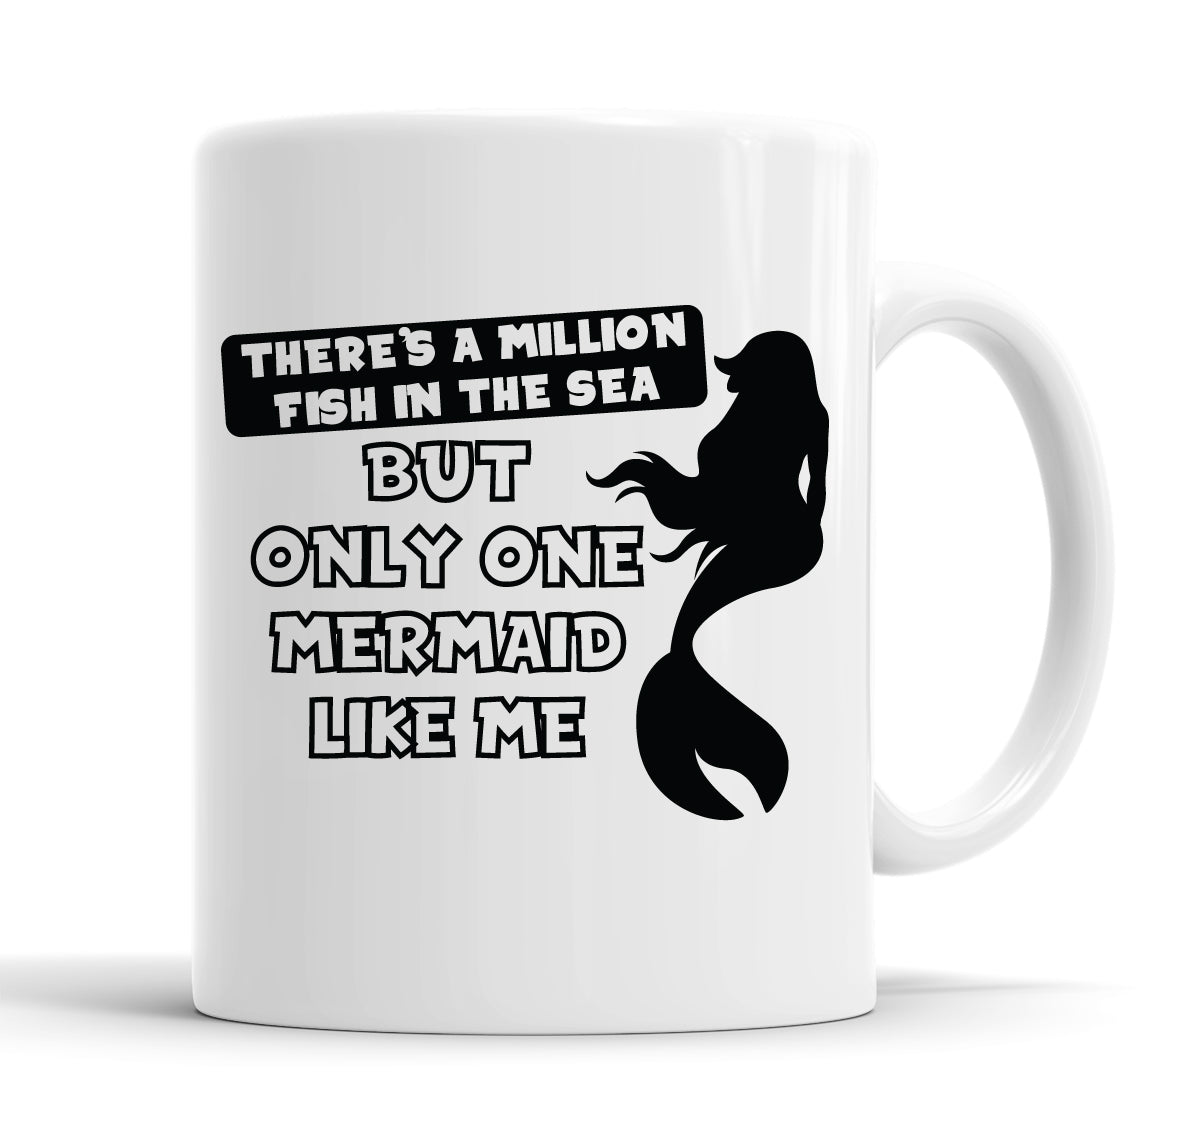 There's A Million Fish In The Sea But Only One Mermaid Like Me Funny Valentine's Day Mug Tea Cup Coffee